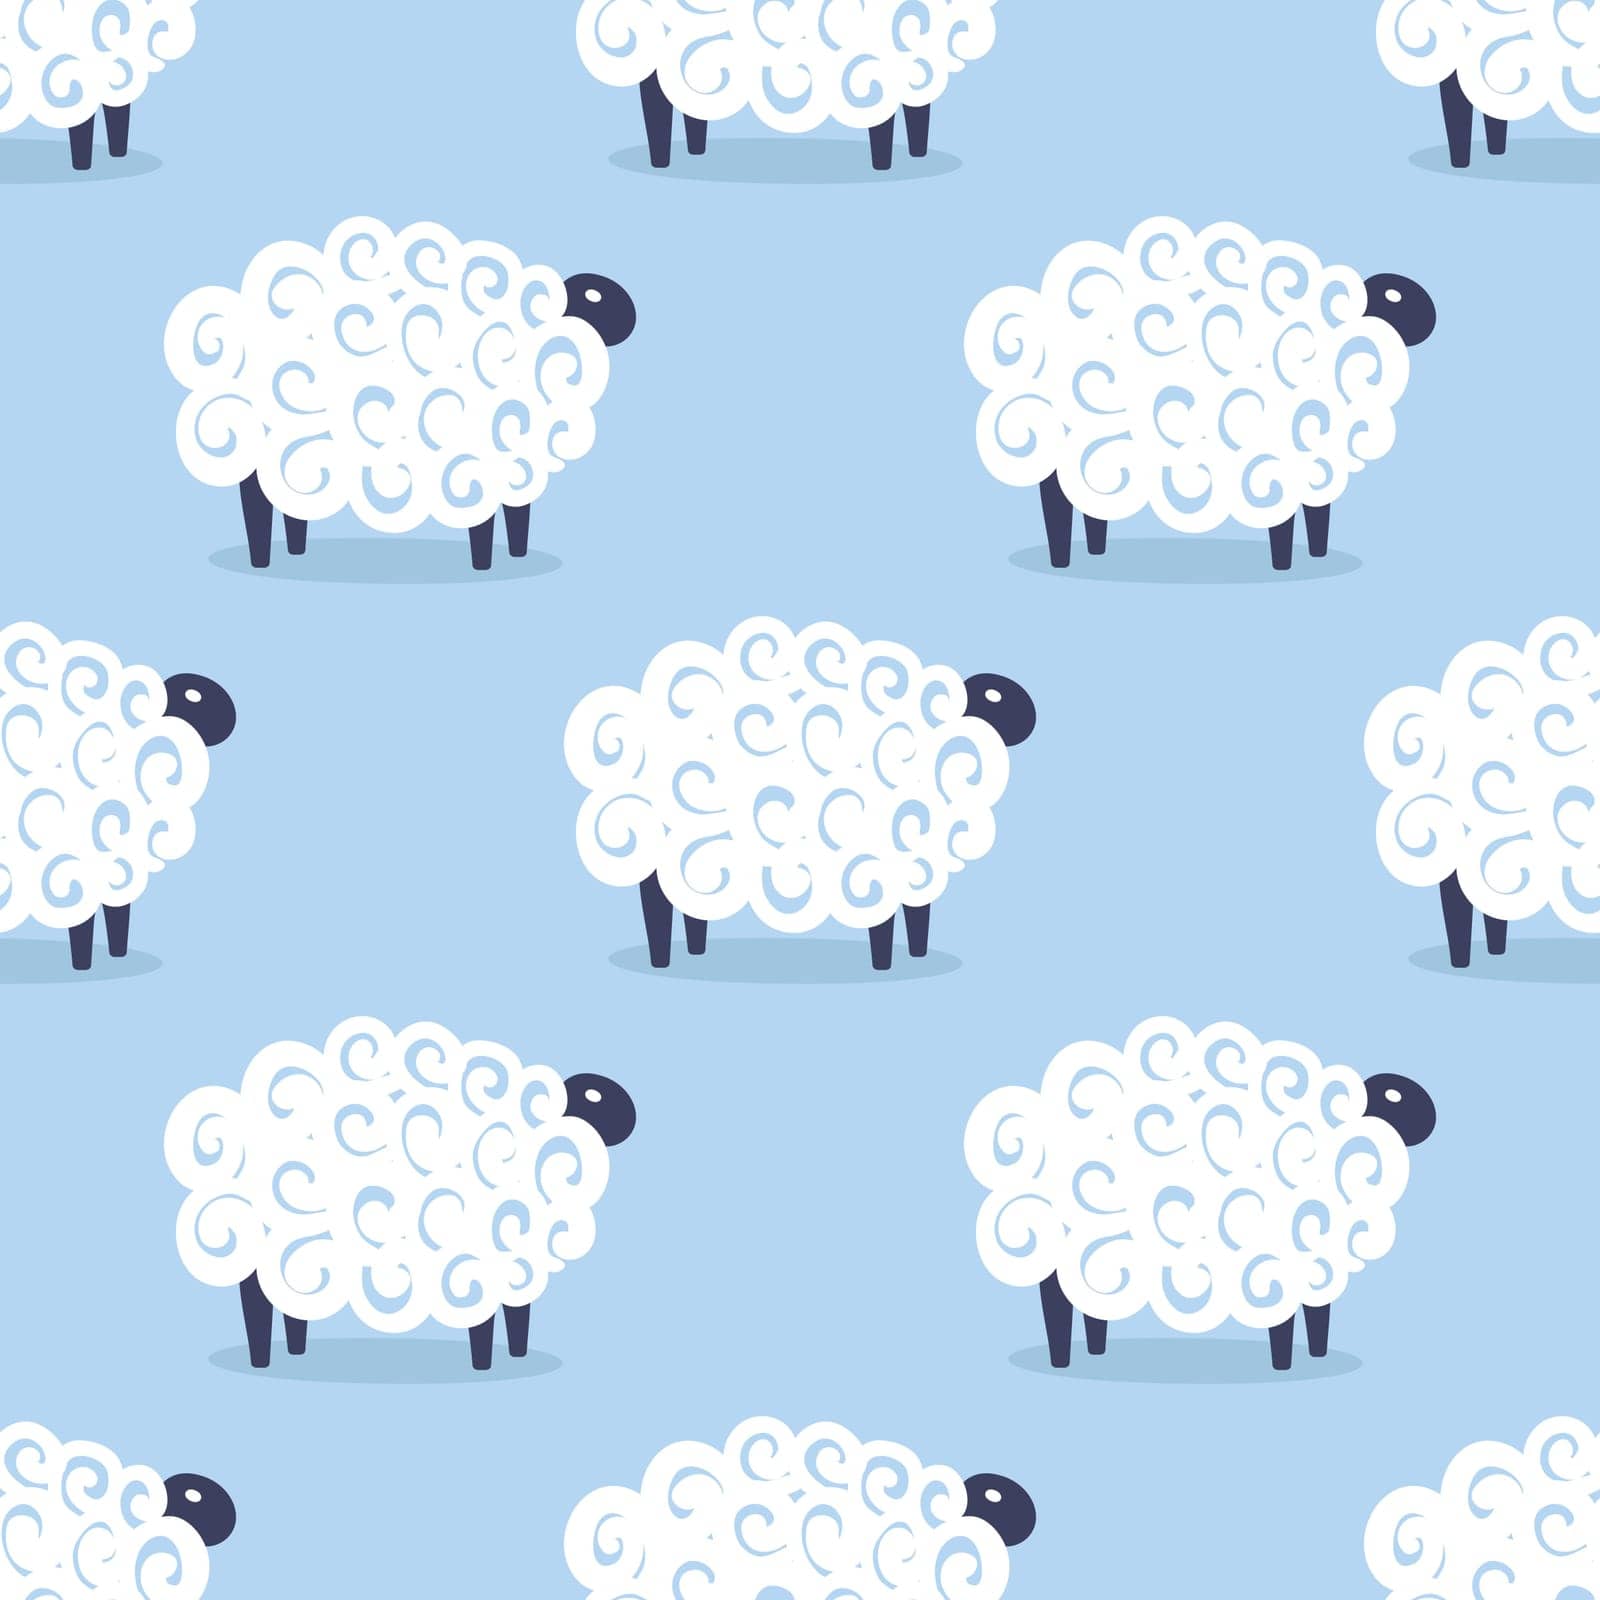 Cute sheep vector seamless pattern kids sweet dreams illustration on blue background. Baby shower background. Child drawing flat style white sheep. Kids design for fabric by Anny_Sketches